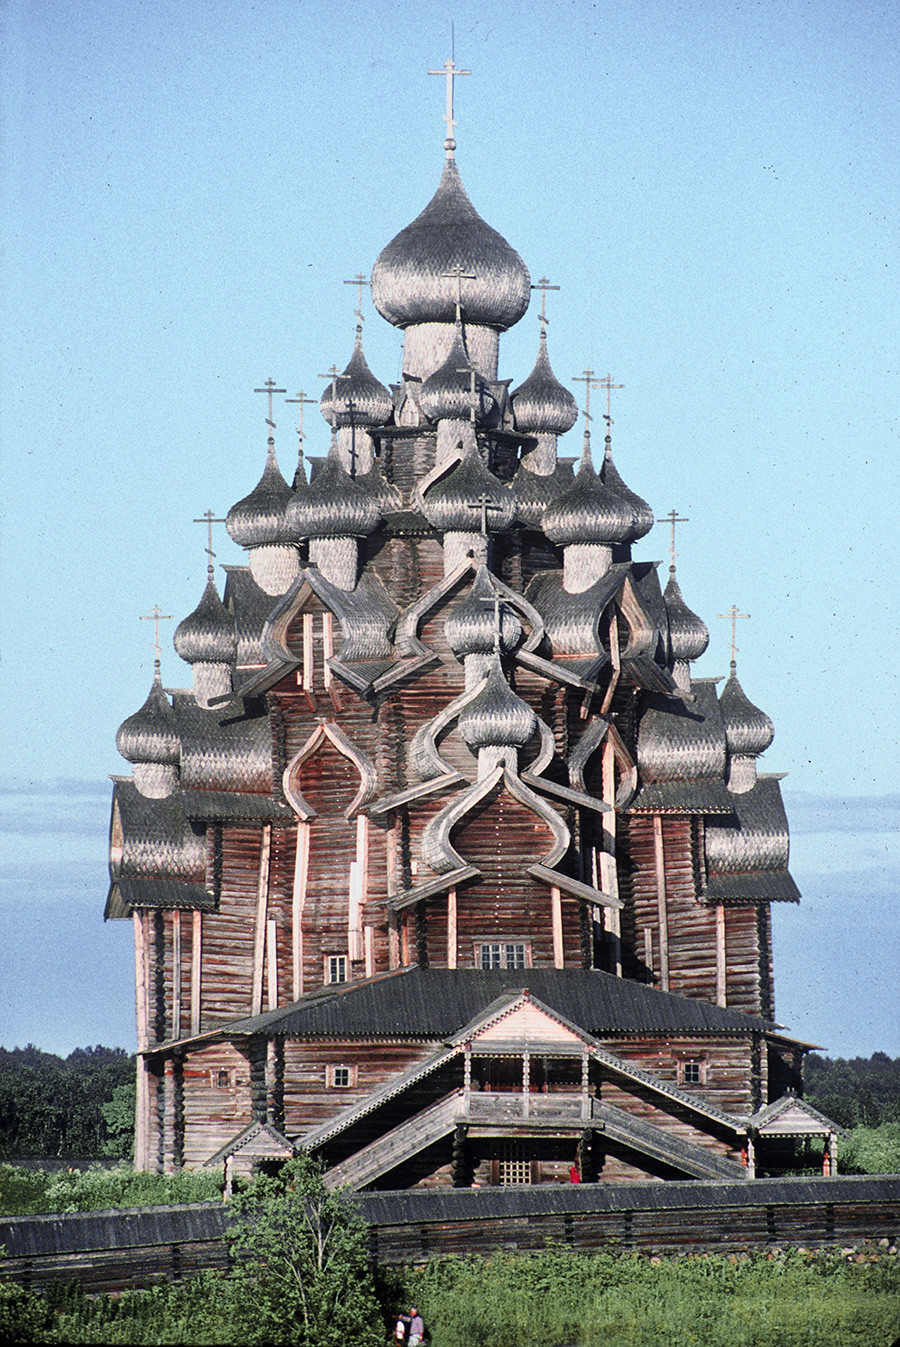 Kizhi pogost. Church of the Transfiguration, west view from Lake Onega. July 13, 1993